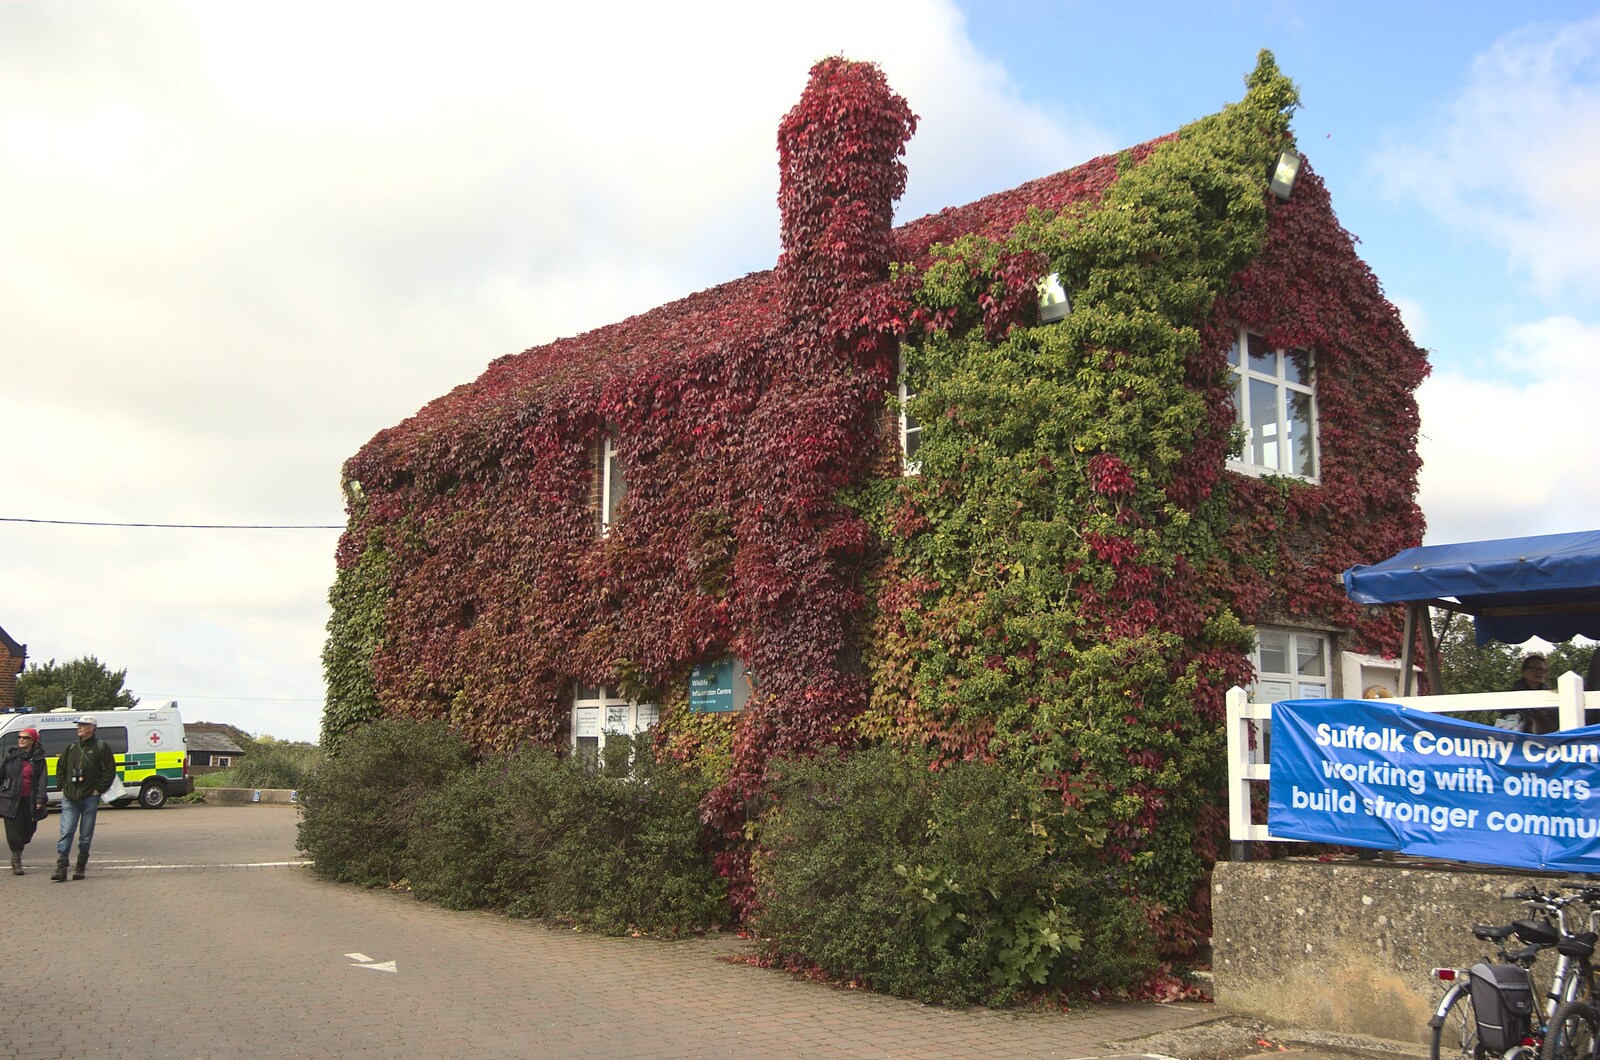 The Aldeburgh Food Festival, Snape Maltings, Suffolk - 25th September 2010: A house covered in red Virginia creeper